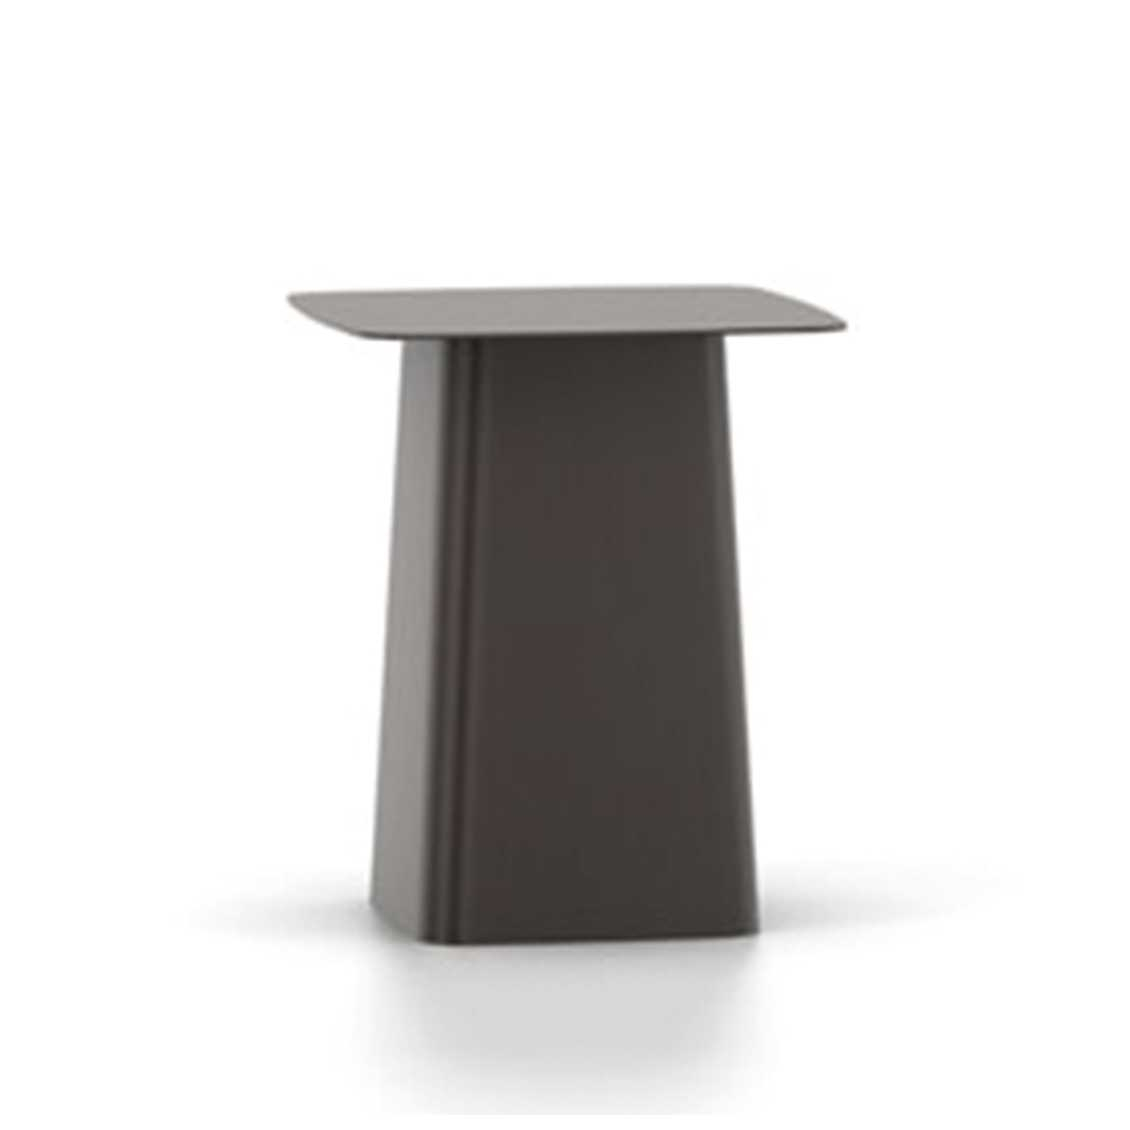 https://www.fundesign.nl/media/catalog/product/v/i/vitra-metal-side-table-chocolade-small-indoor_1.jpg